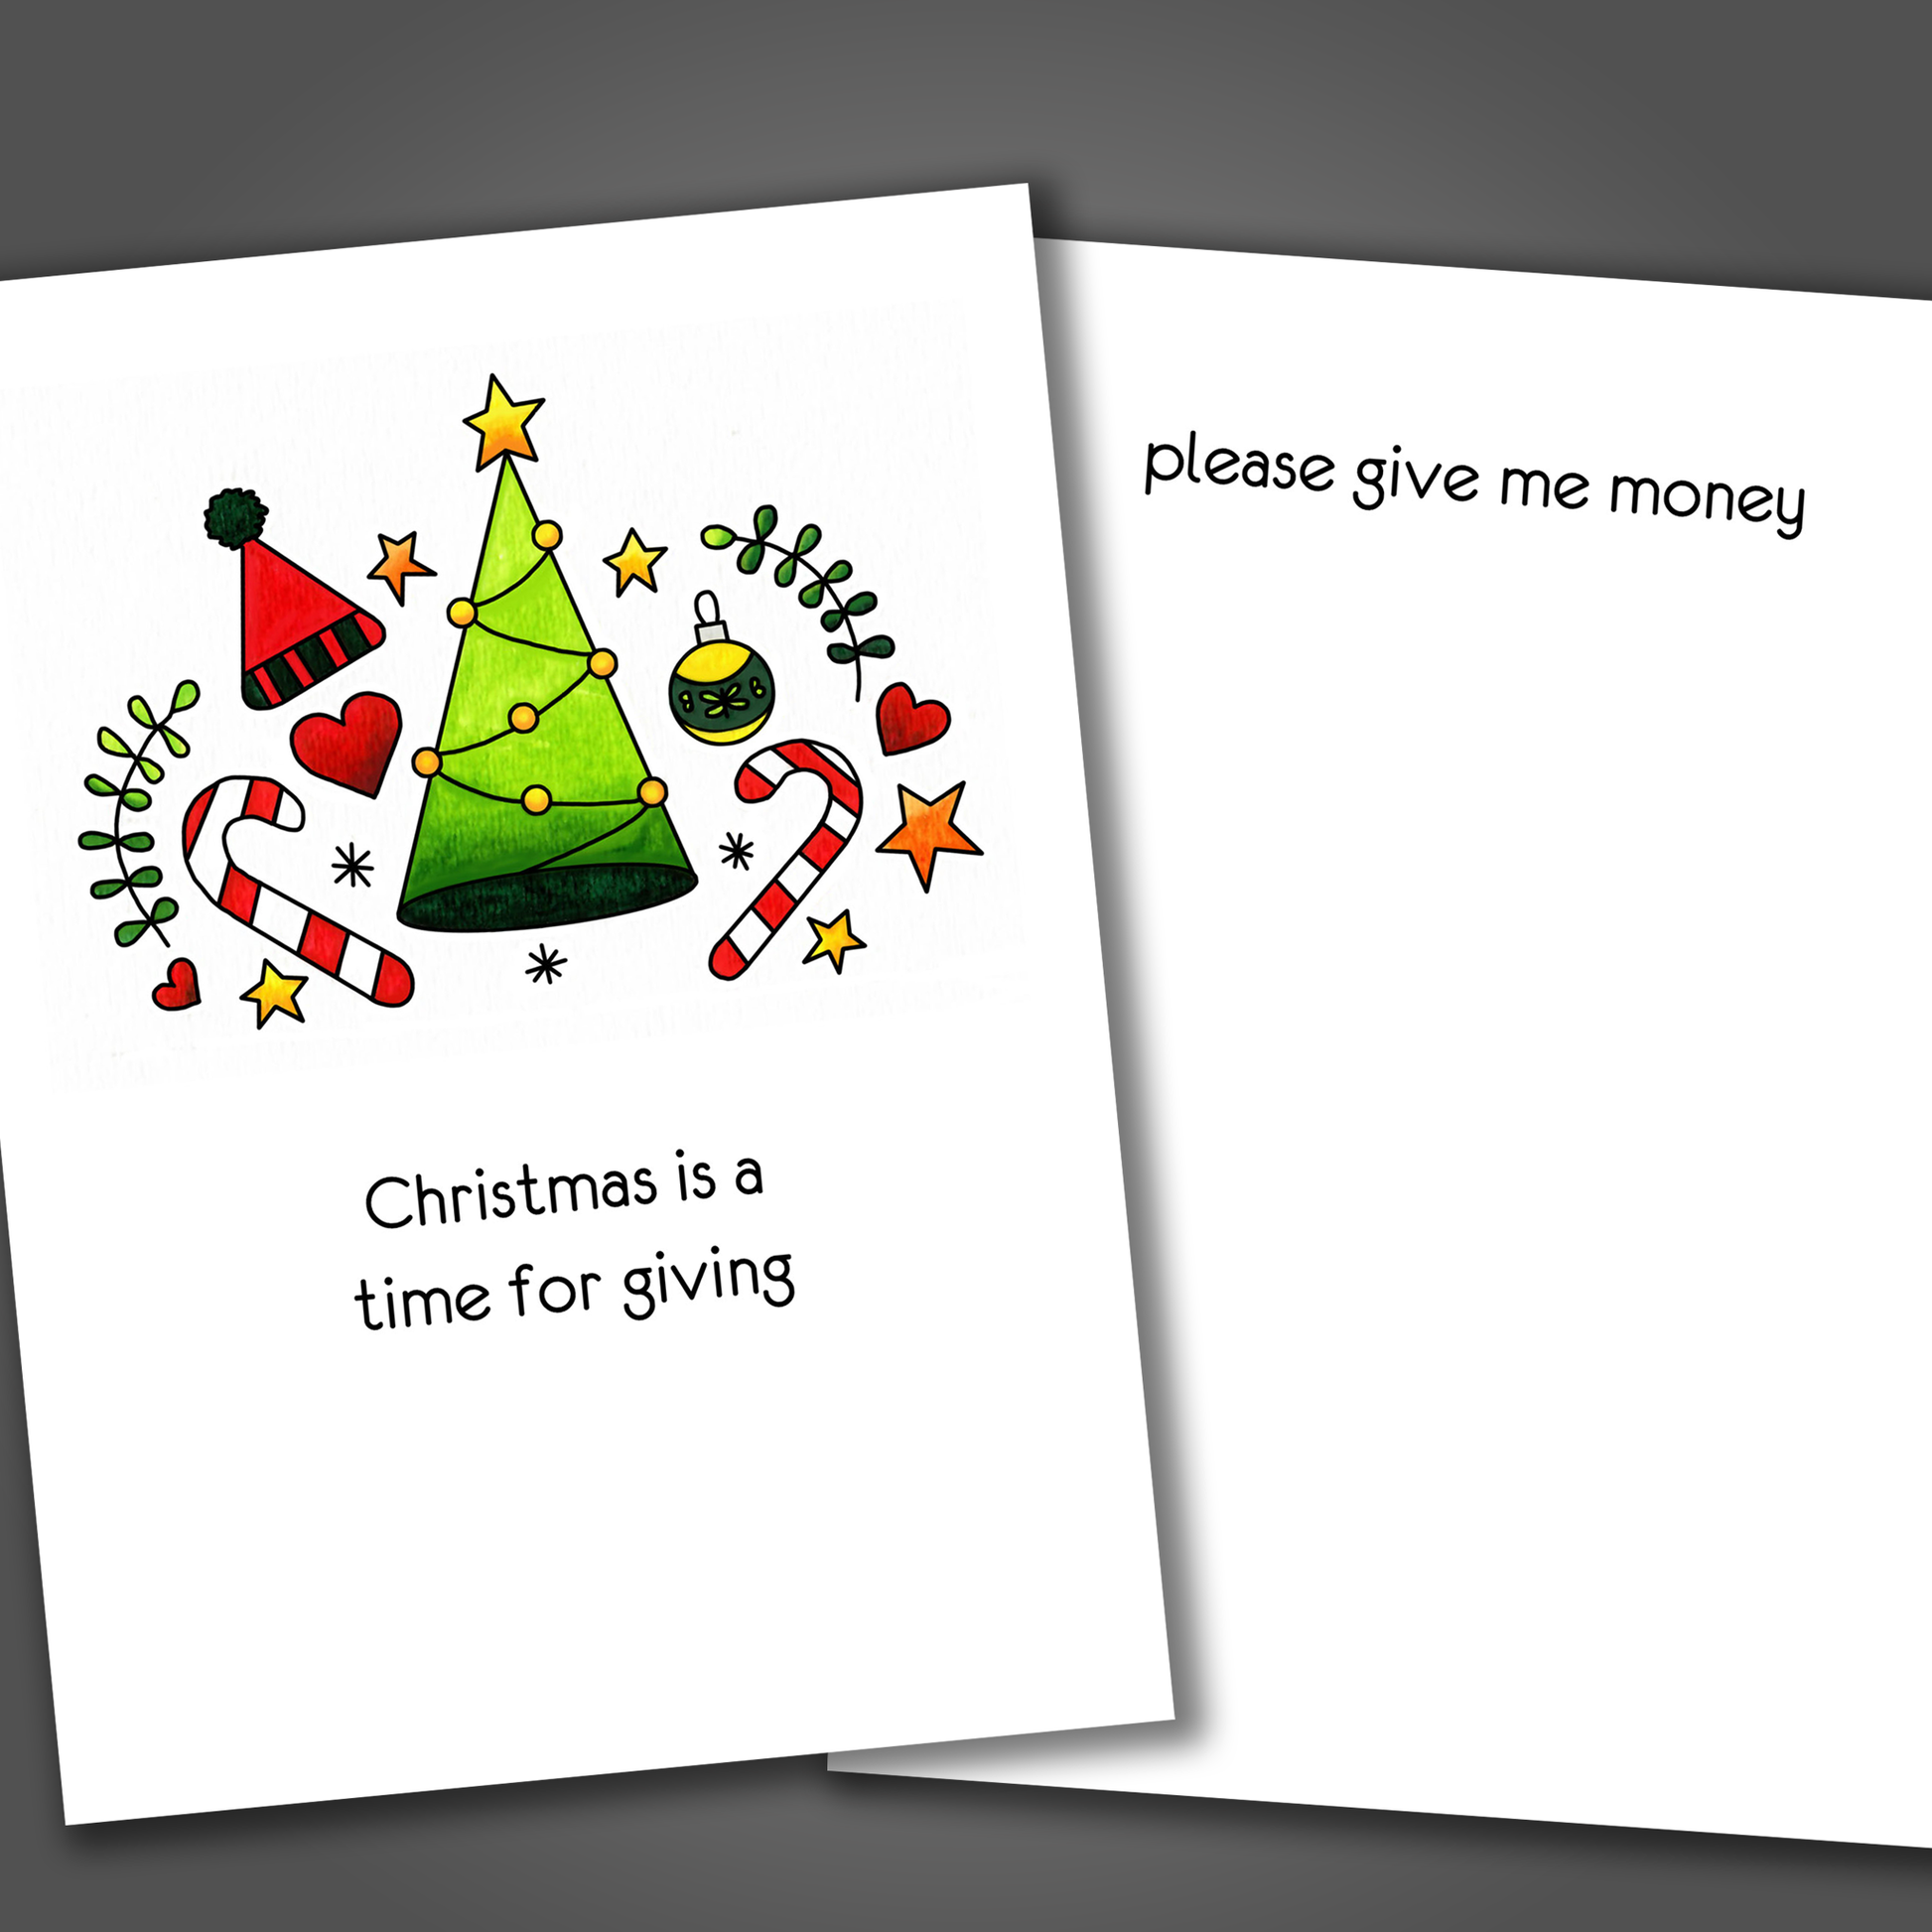 Funny Christmas card with a tree on the front of the card. Inside the card is a funny joke that ends with please give me money.